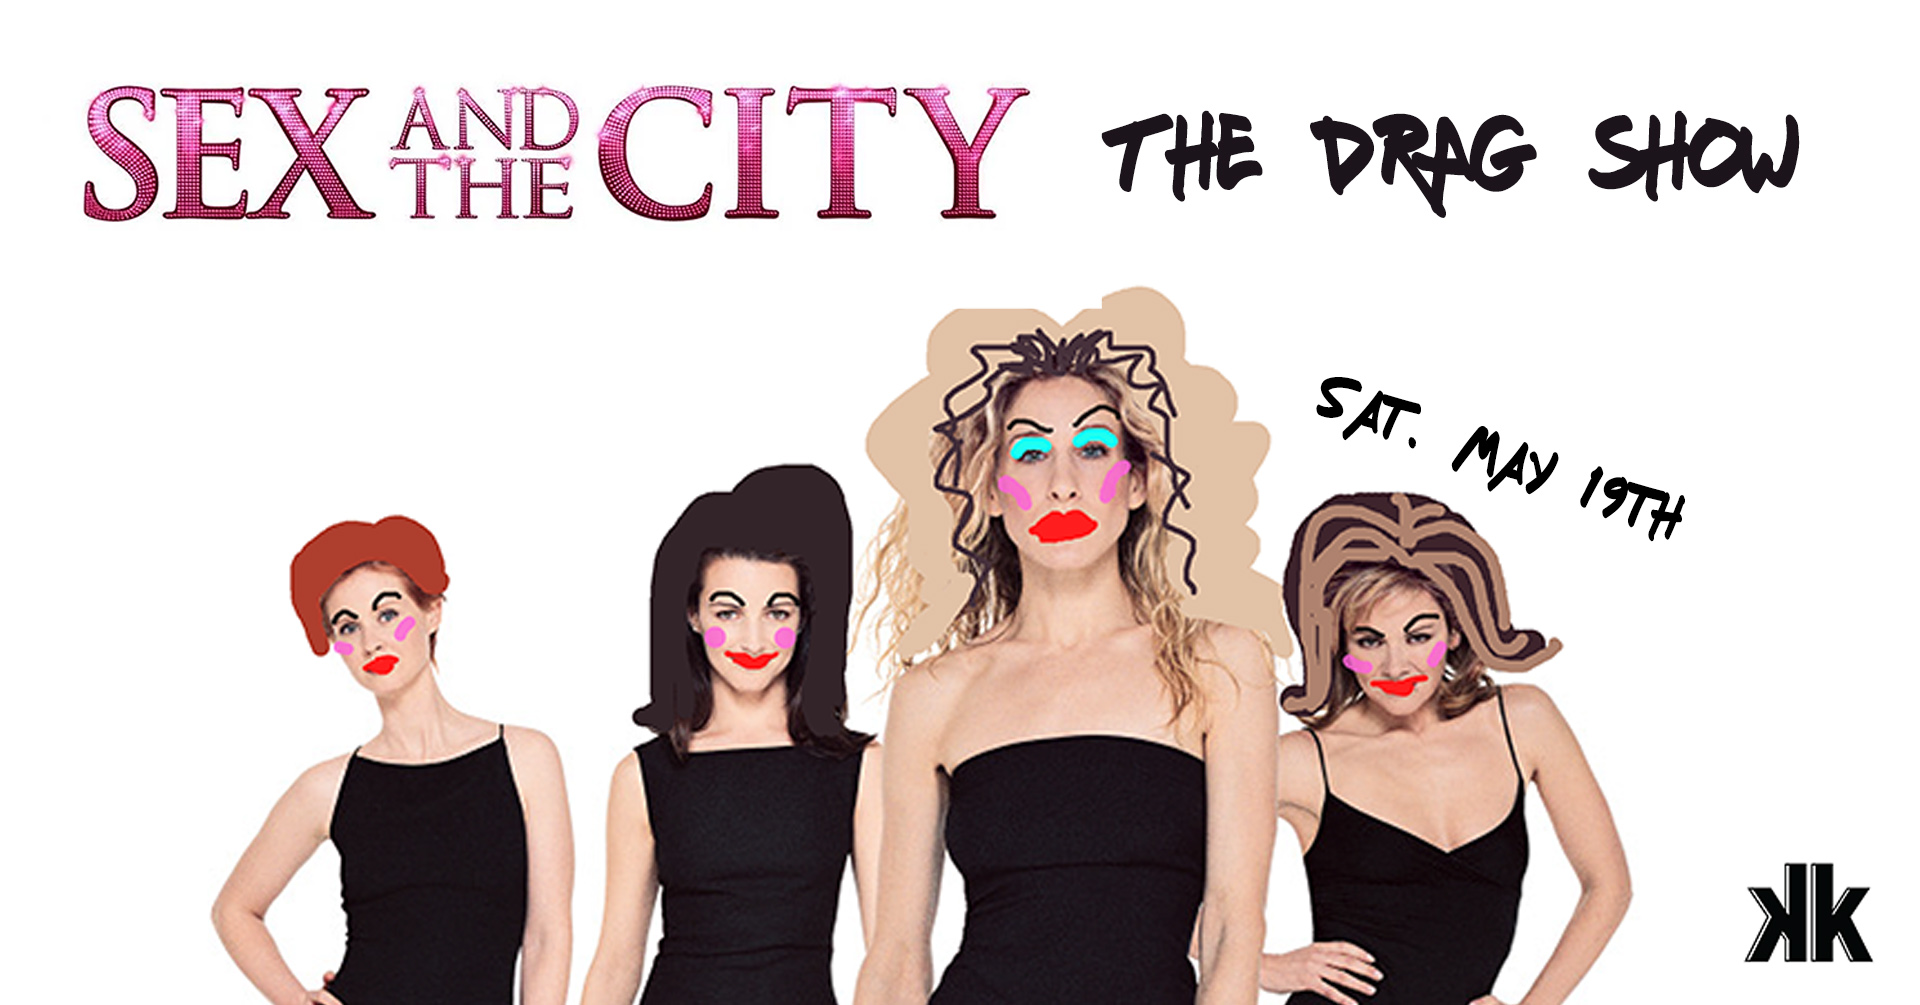 Sex And The City The Drag Show Tickets Kremwerk Seattle Wa Sat May 19 2018 At 7pm 